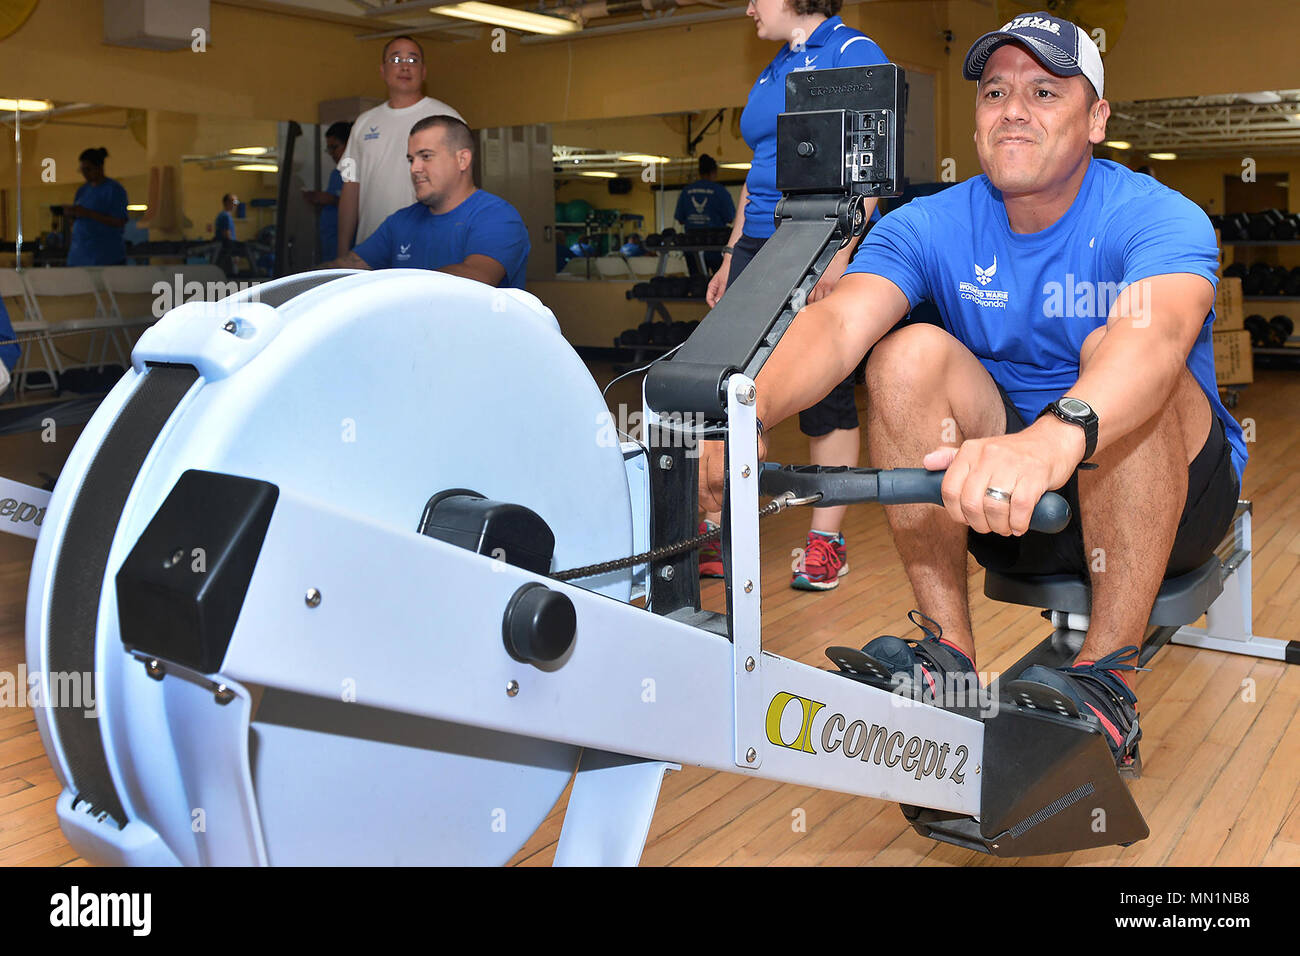 U.S. Air Force Master Sgt. Israel Delgado uses a rowing machine during the  Air Force Wounded Warrior Program's Warrior Care Event inside the Offutt  Field House gym on Offutt Air Force Base,